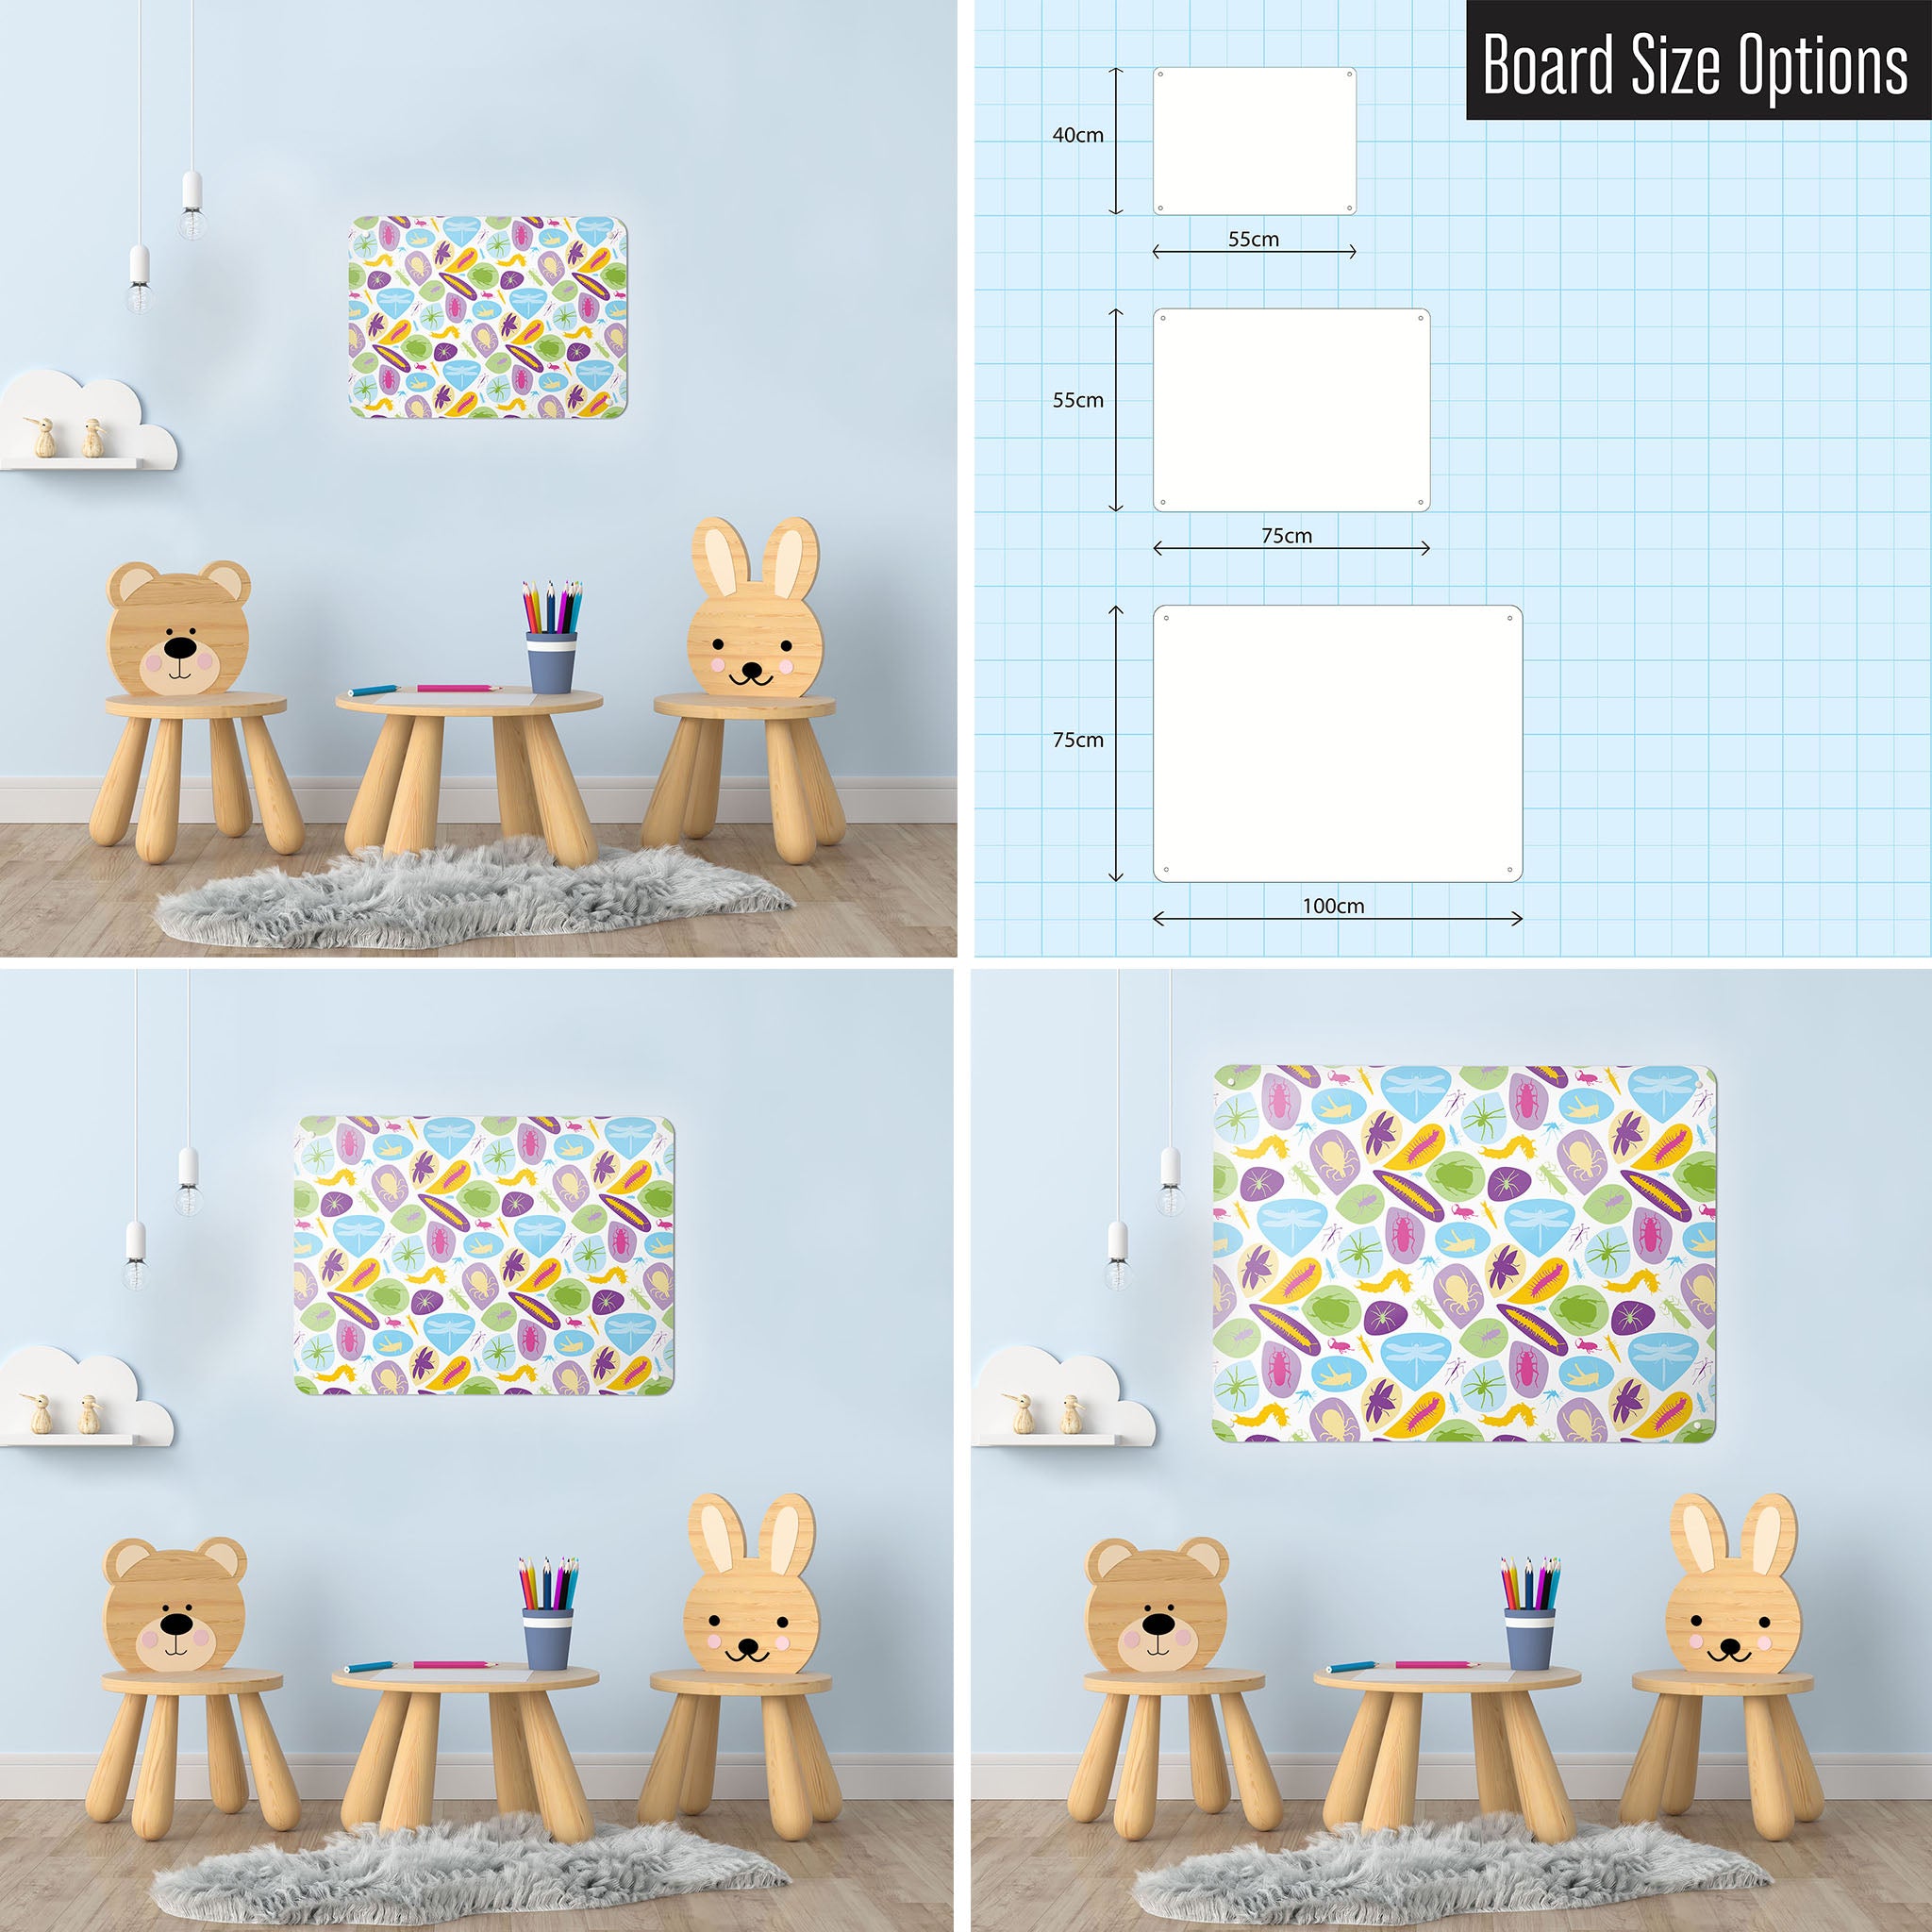 Three photographs of a playroom interior and a diagram to show size comparisons of a bugs design  magnetic notice board